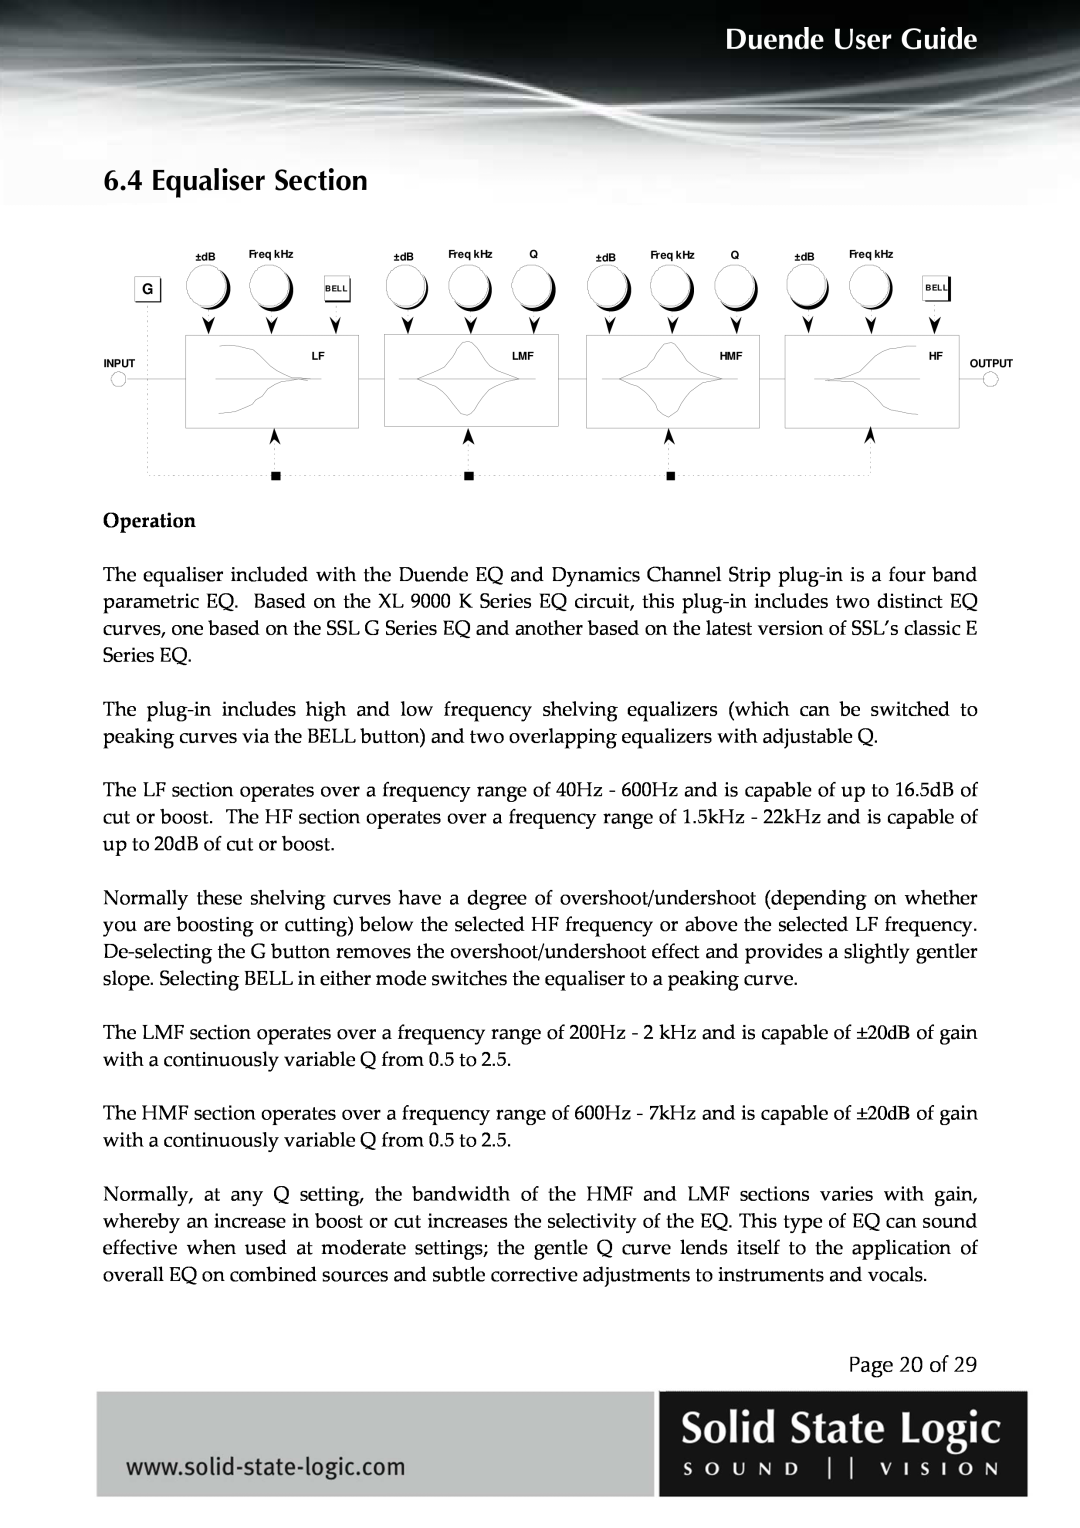 Solid State Logic DUENDE manual Equaliser Section, Page 20 of, Duende User Guide 